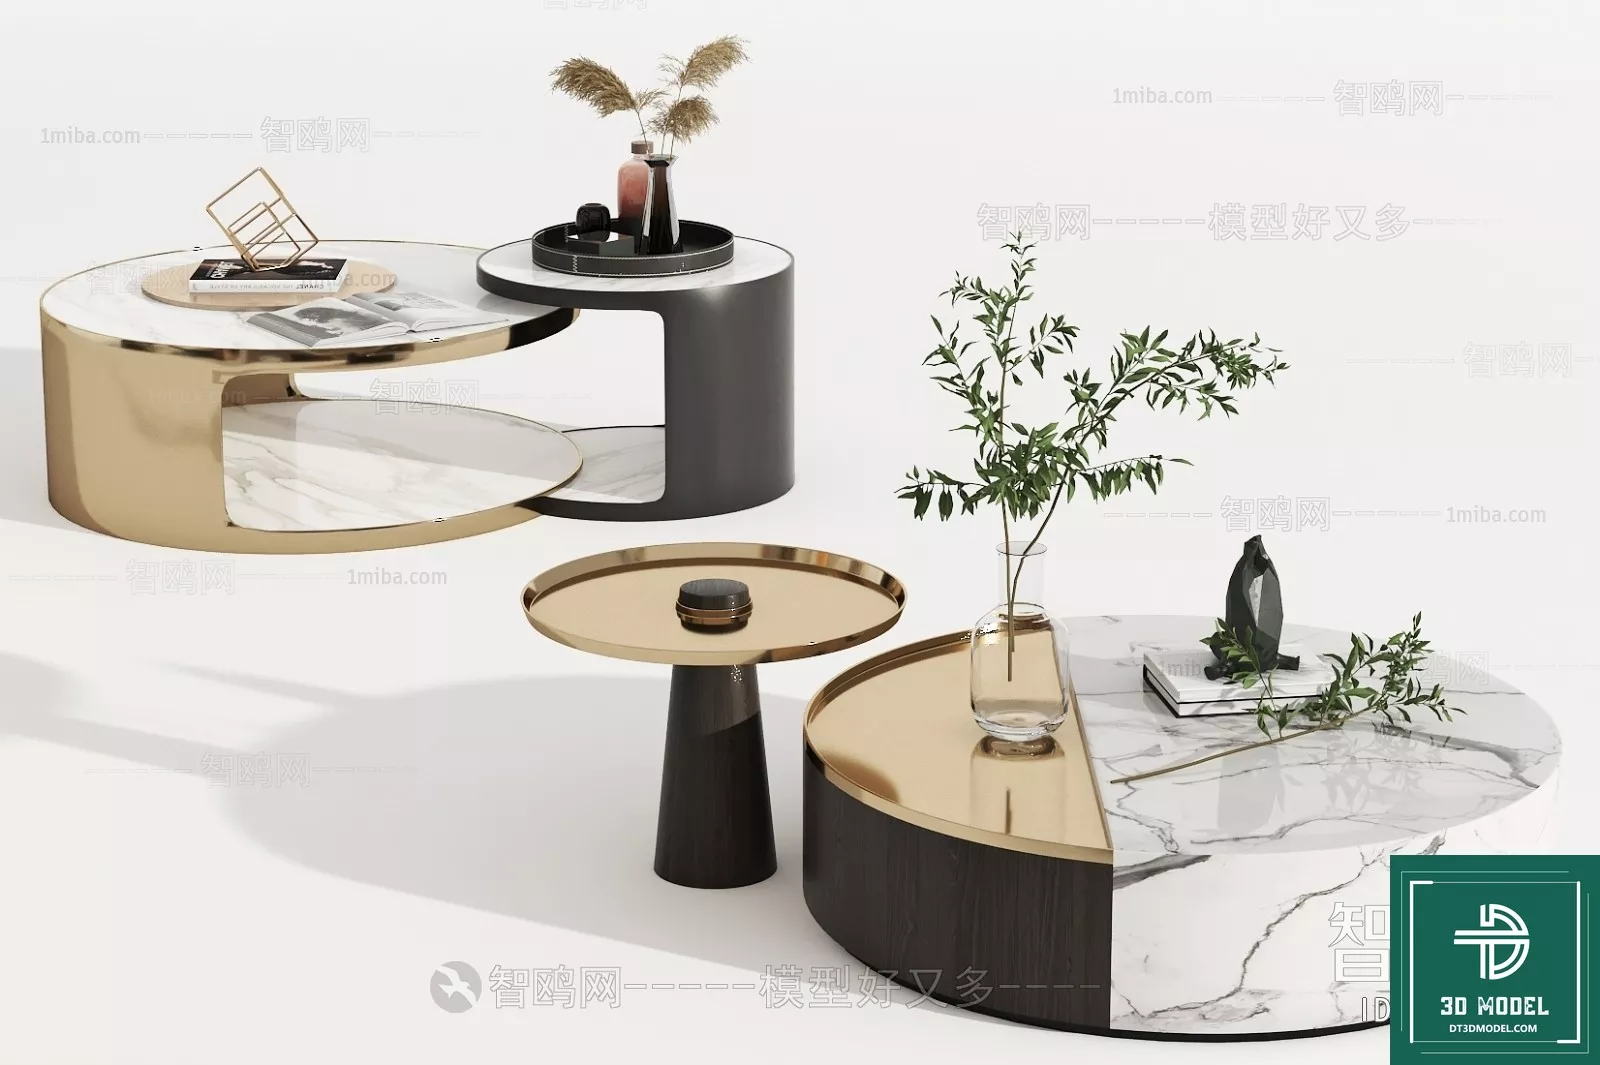 MODERN TEA TABLE - SKETCHUP 3D MODEL - VRAY OR ENSCAPE - ID14966